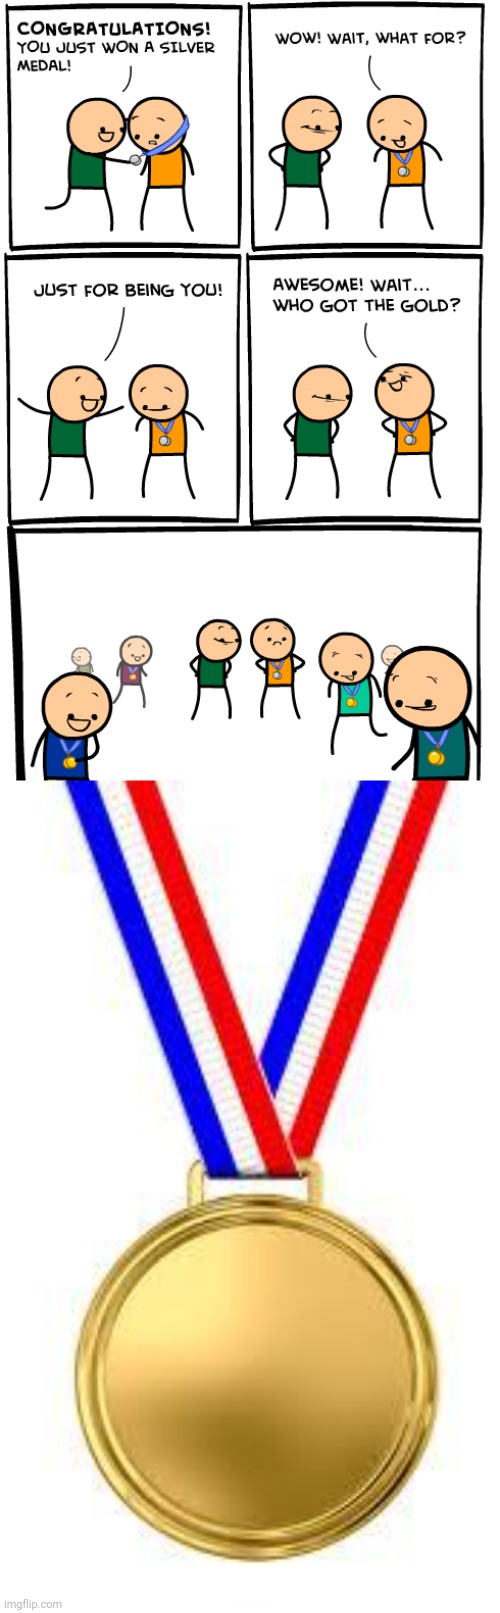 The medal | image tagged in gld medal,memes,comics/cartoons,comics,cyanide and happiness,cyanide | made w/ Imgflip meme maker